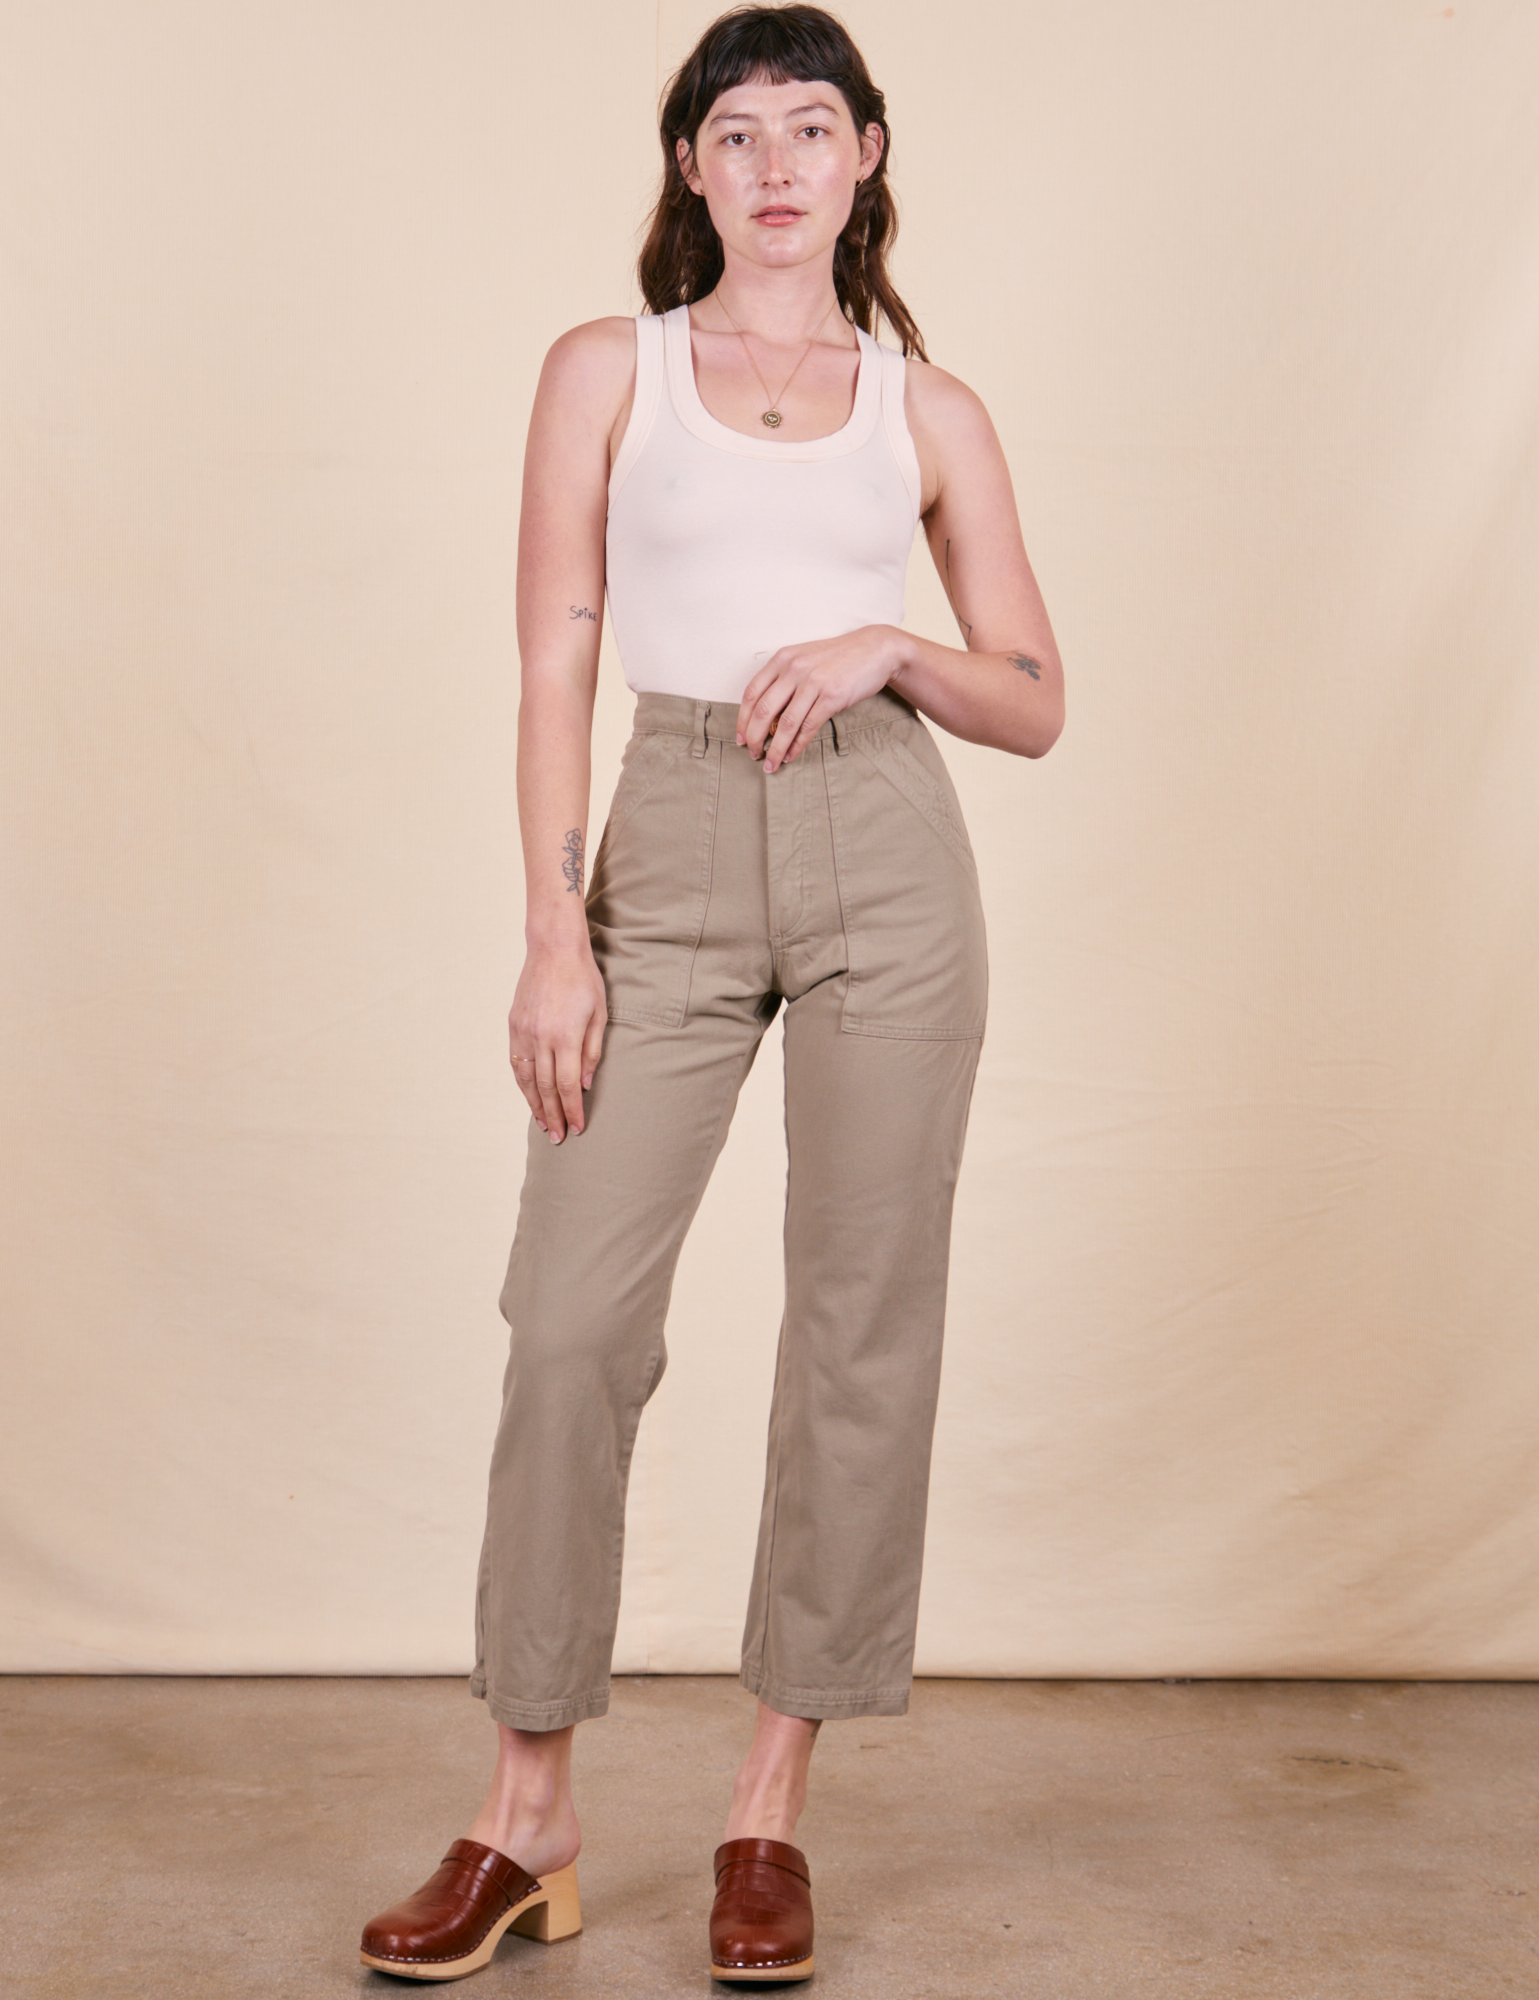 Alex is 5&#39;8&quot; and wearing XS Work Pants in Khaki Grey paired with vintage off-white Tank Top